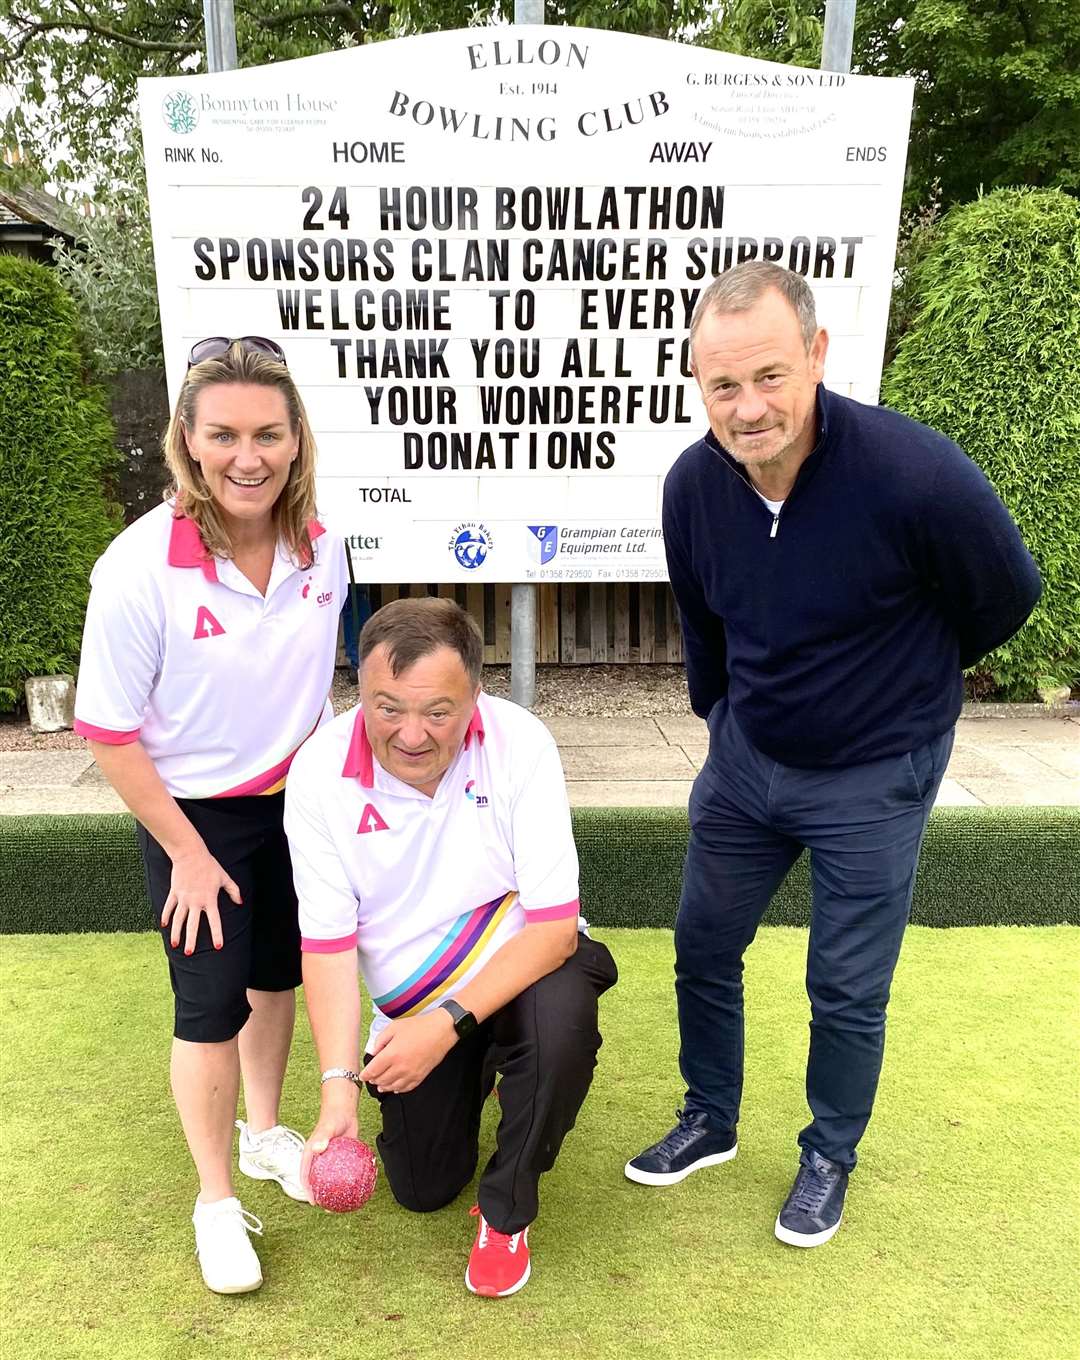 CLAN's Fiona McPherson with organiser Micheal Stephen and host Davie Robertson at Ellon Bowling Club. Picture: Phil Harman